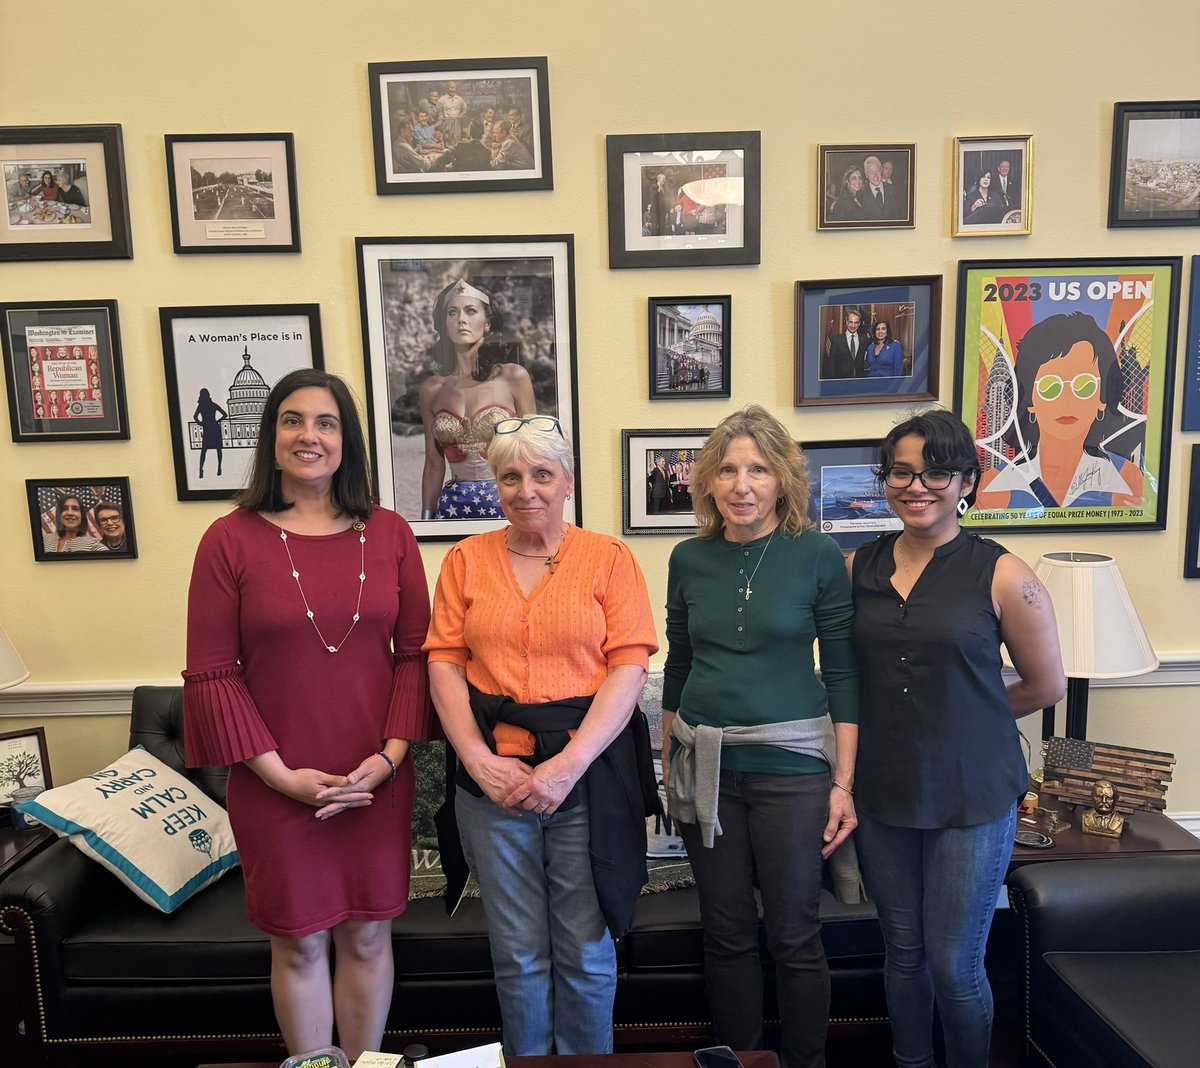 Our office was happy to welcome constituents from #StatenIsland to Washington, D.C. for a Capitol tour today. If your summer plans include a trip to our nation's capital, be sure to contact our office to see the Capitol, White House & more! ⬇️ malliotakis.house.gov/services/tours…